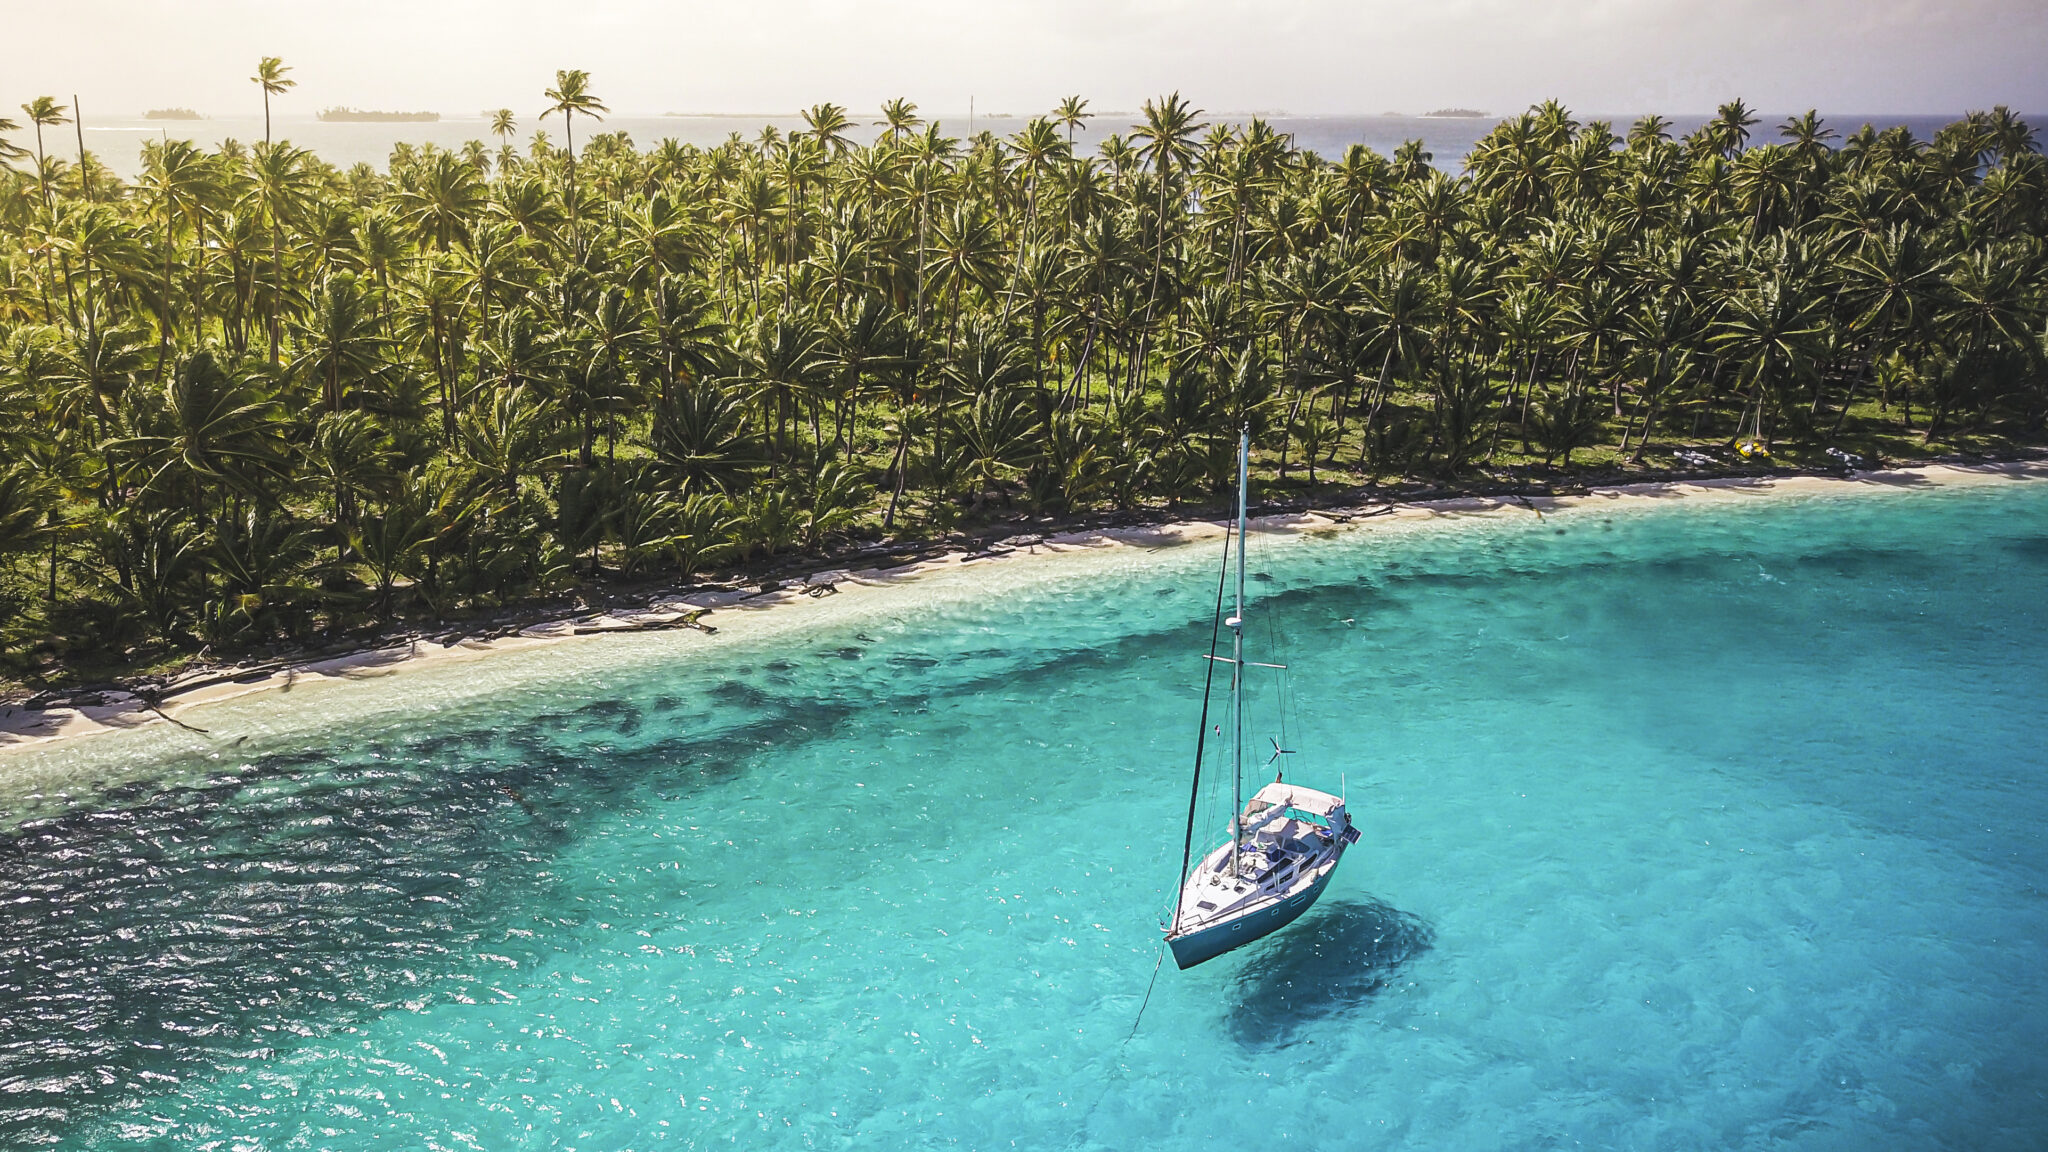 A scuba diving boat anchored in crystal clear azure water, which provides excellent tropical liveaboard diving for beginners